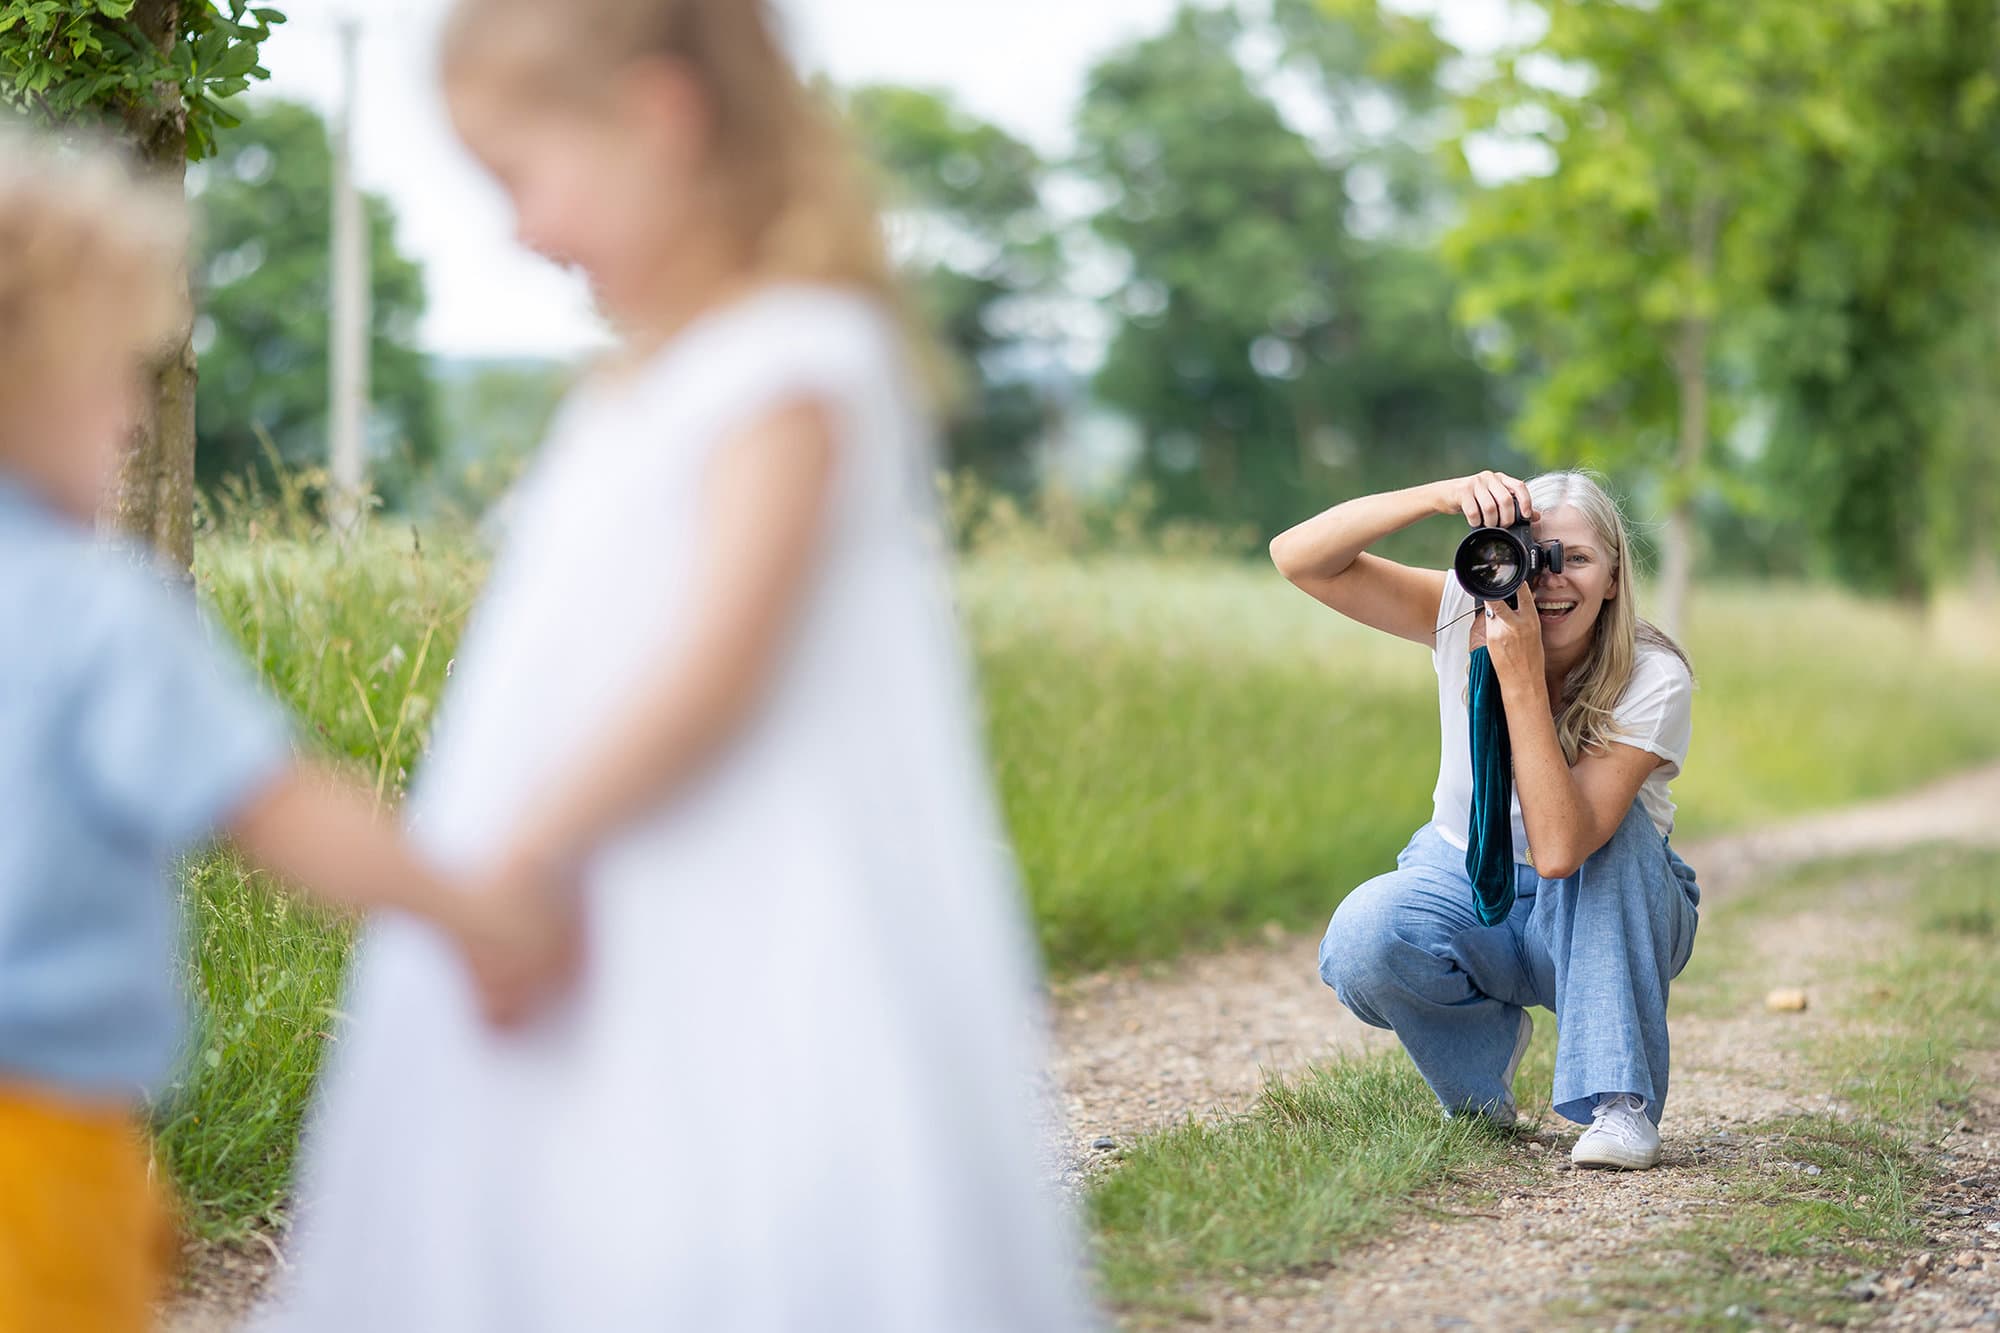 Alison Mckenny takes a photo of two small children during a Family Photoshoot on her farm in Suffolk